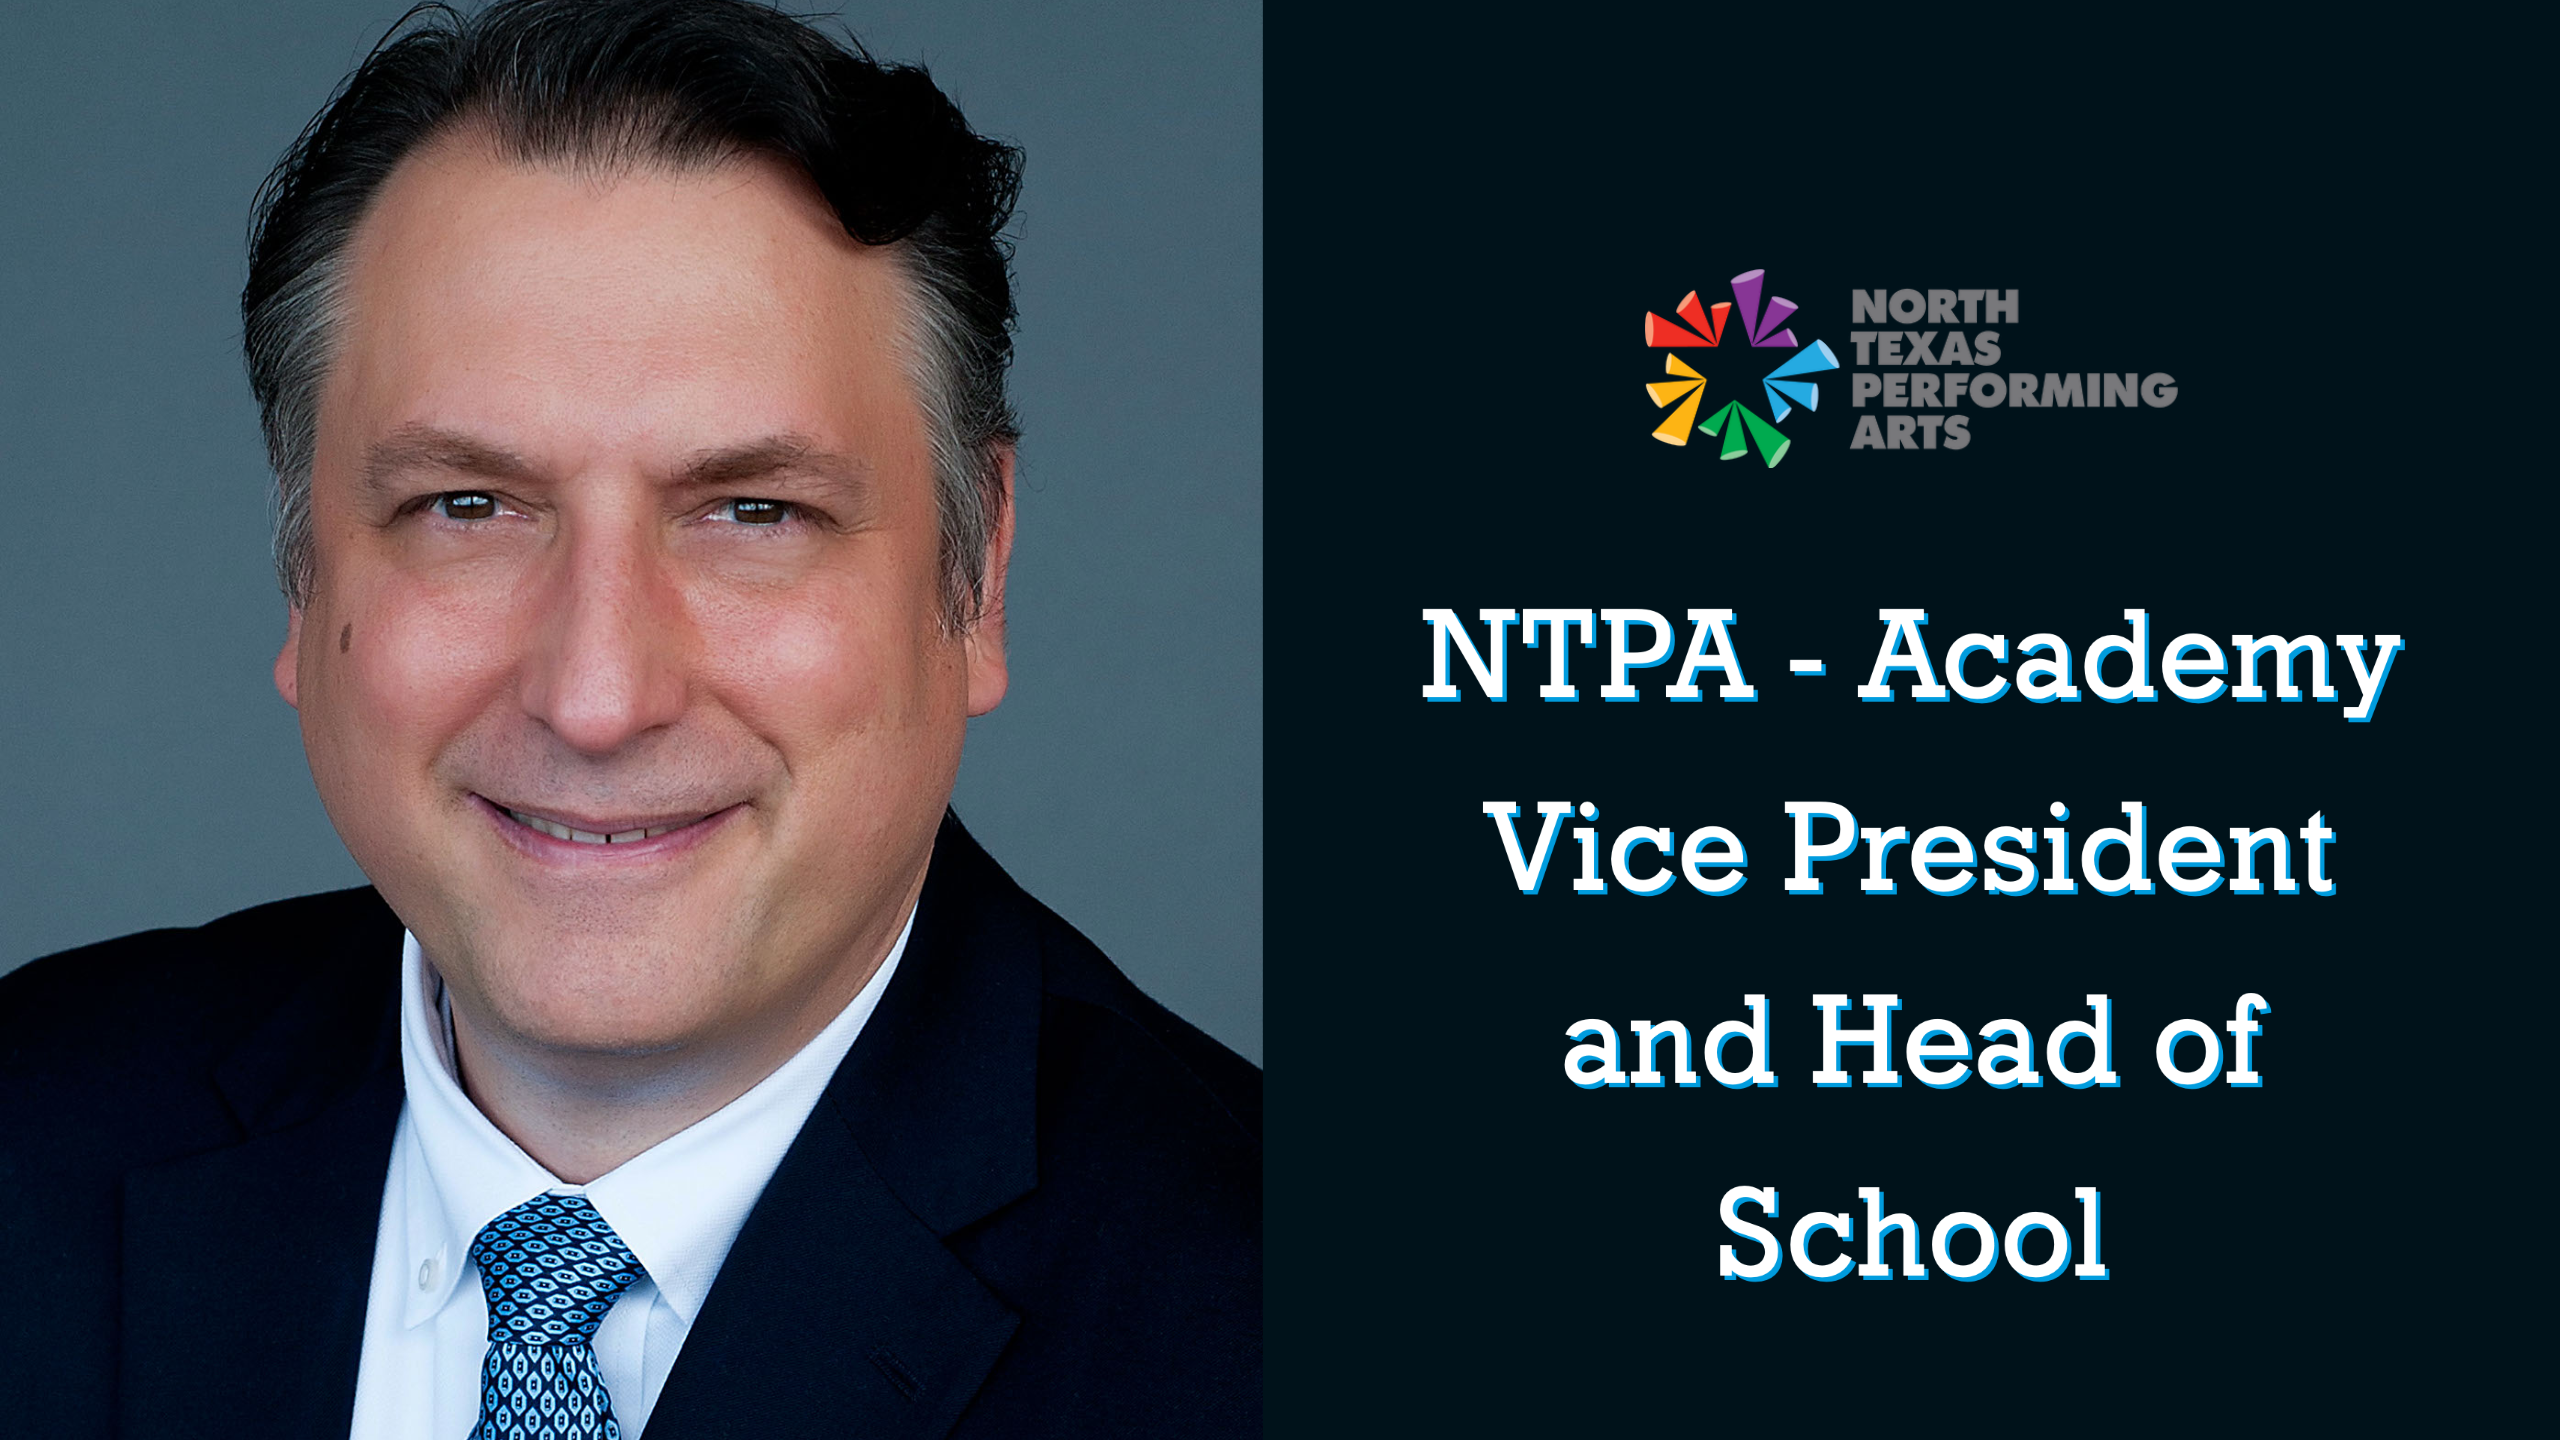 NTPA - Academy Vice President and Head of School Mike Mazur Announcement